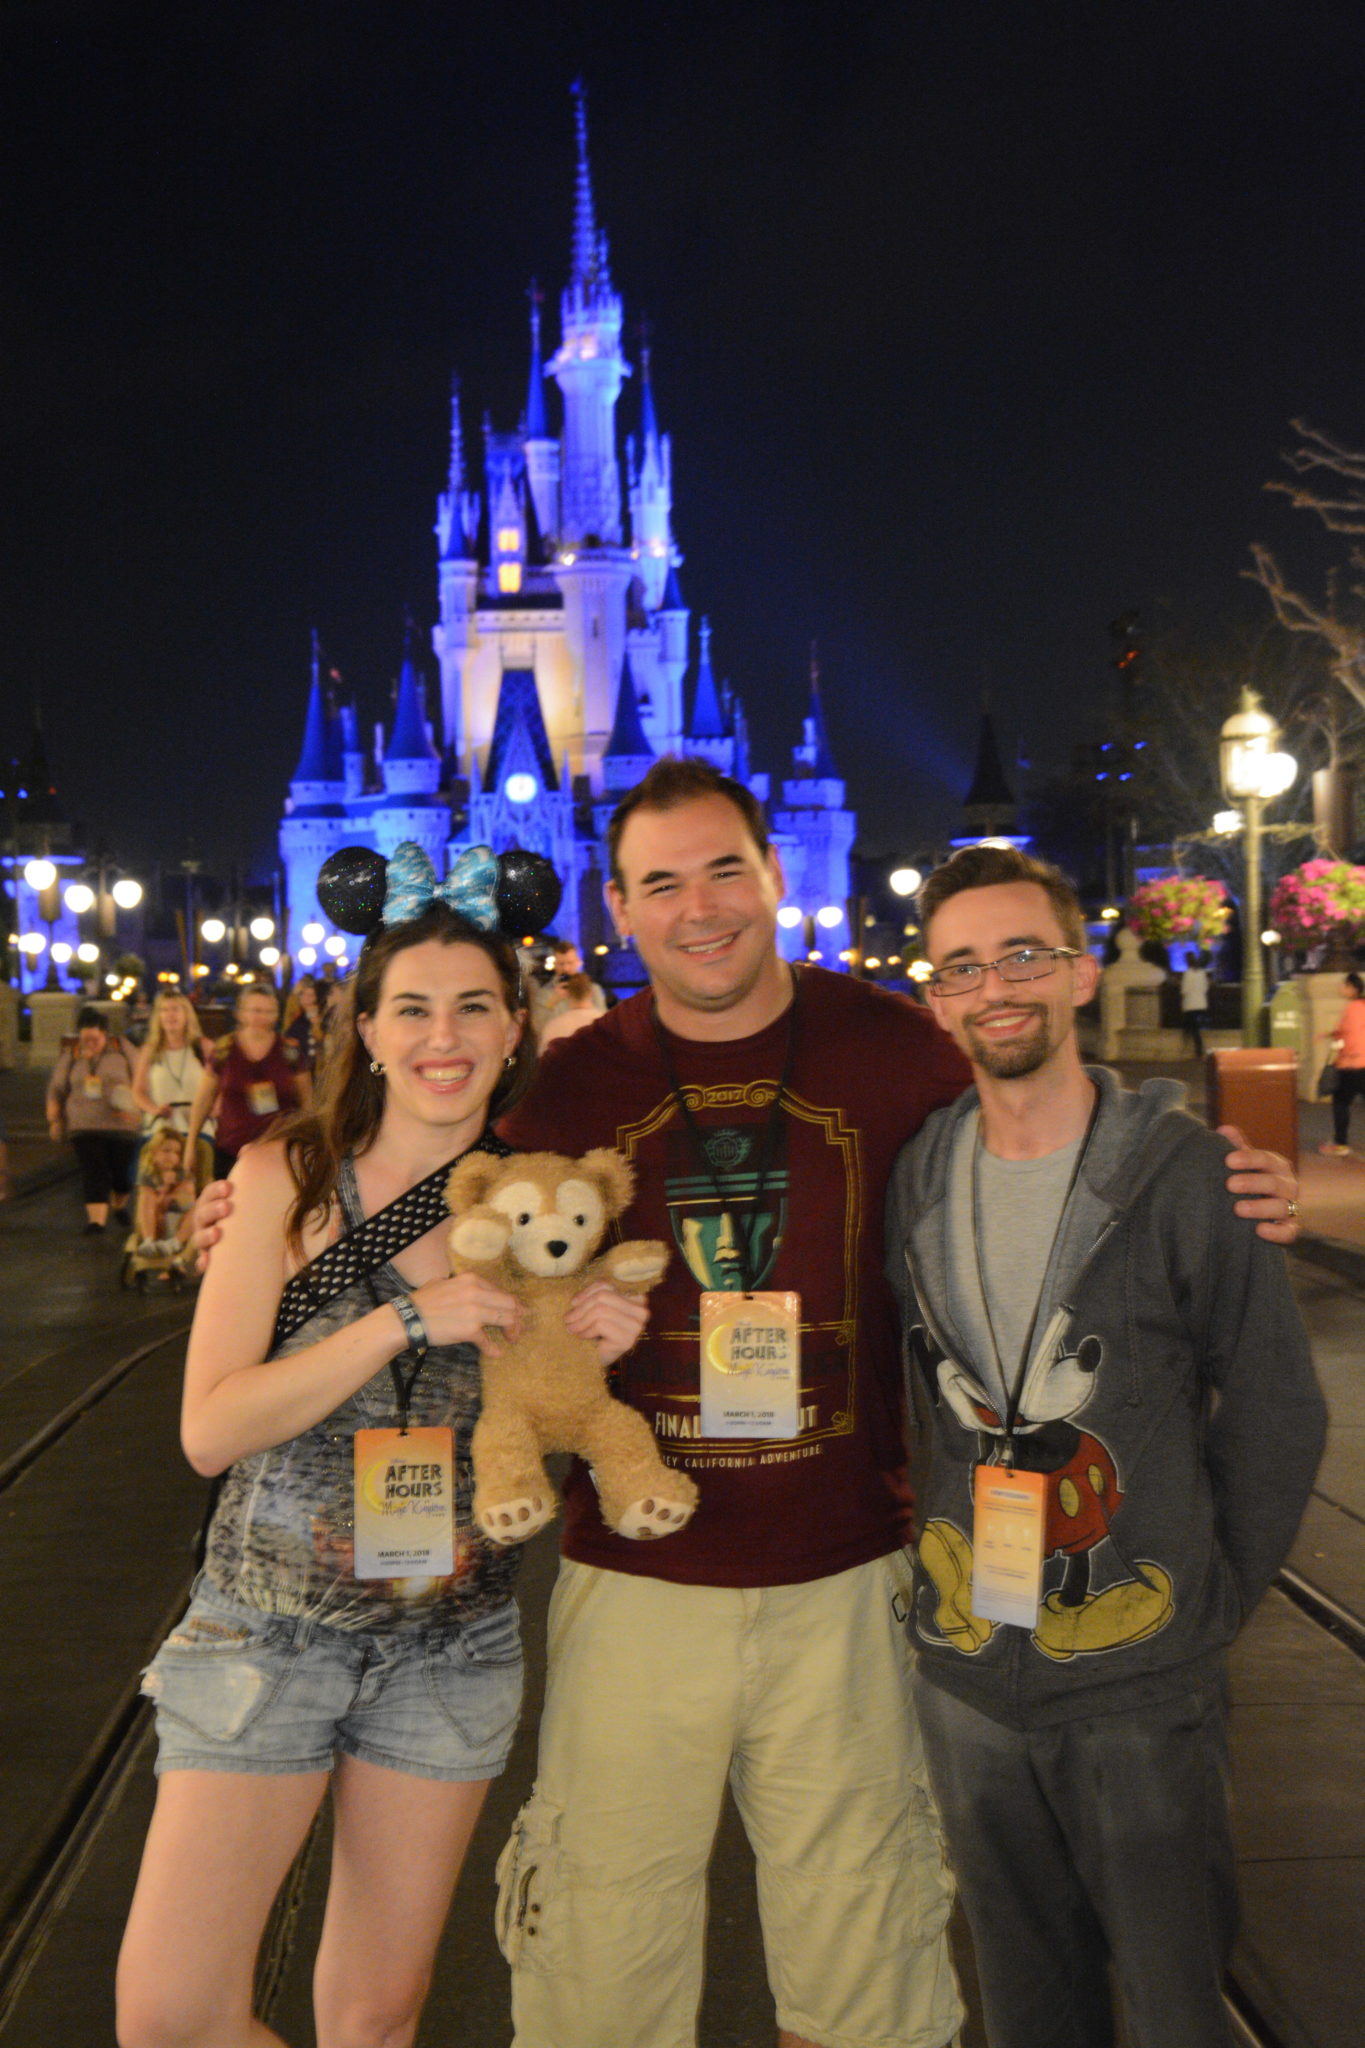 Chelsea, Doug, and Jay in front of Cinderella Castle during the After Hours event.